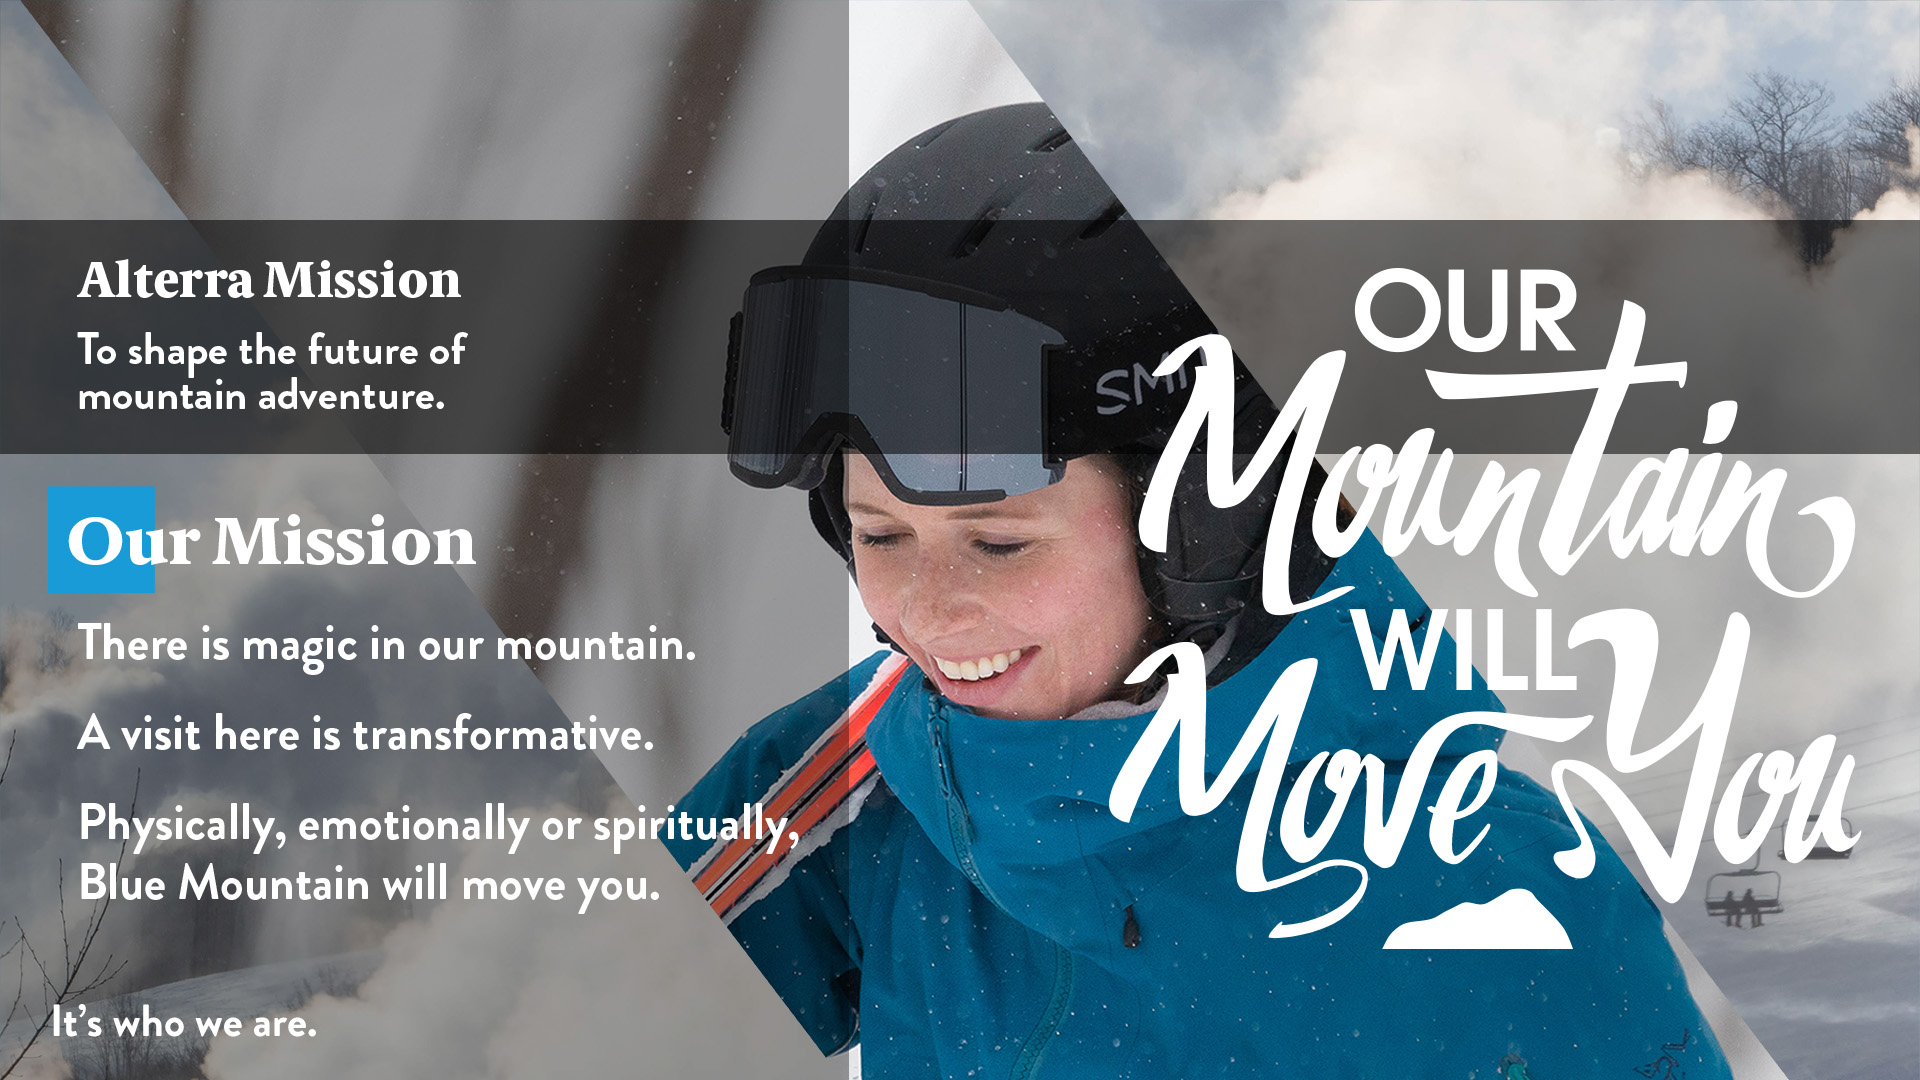 Our Mountain will move you at Blue Mountain